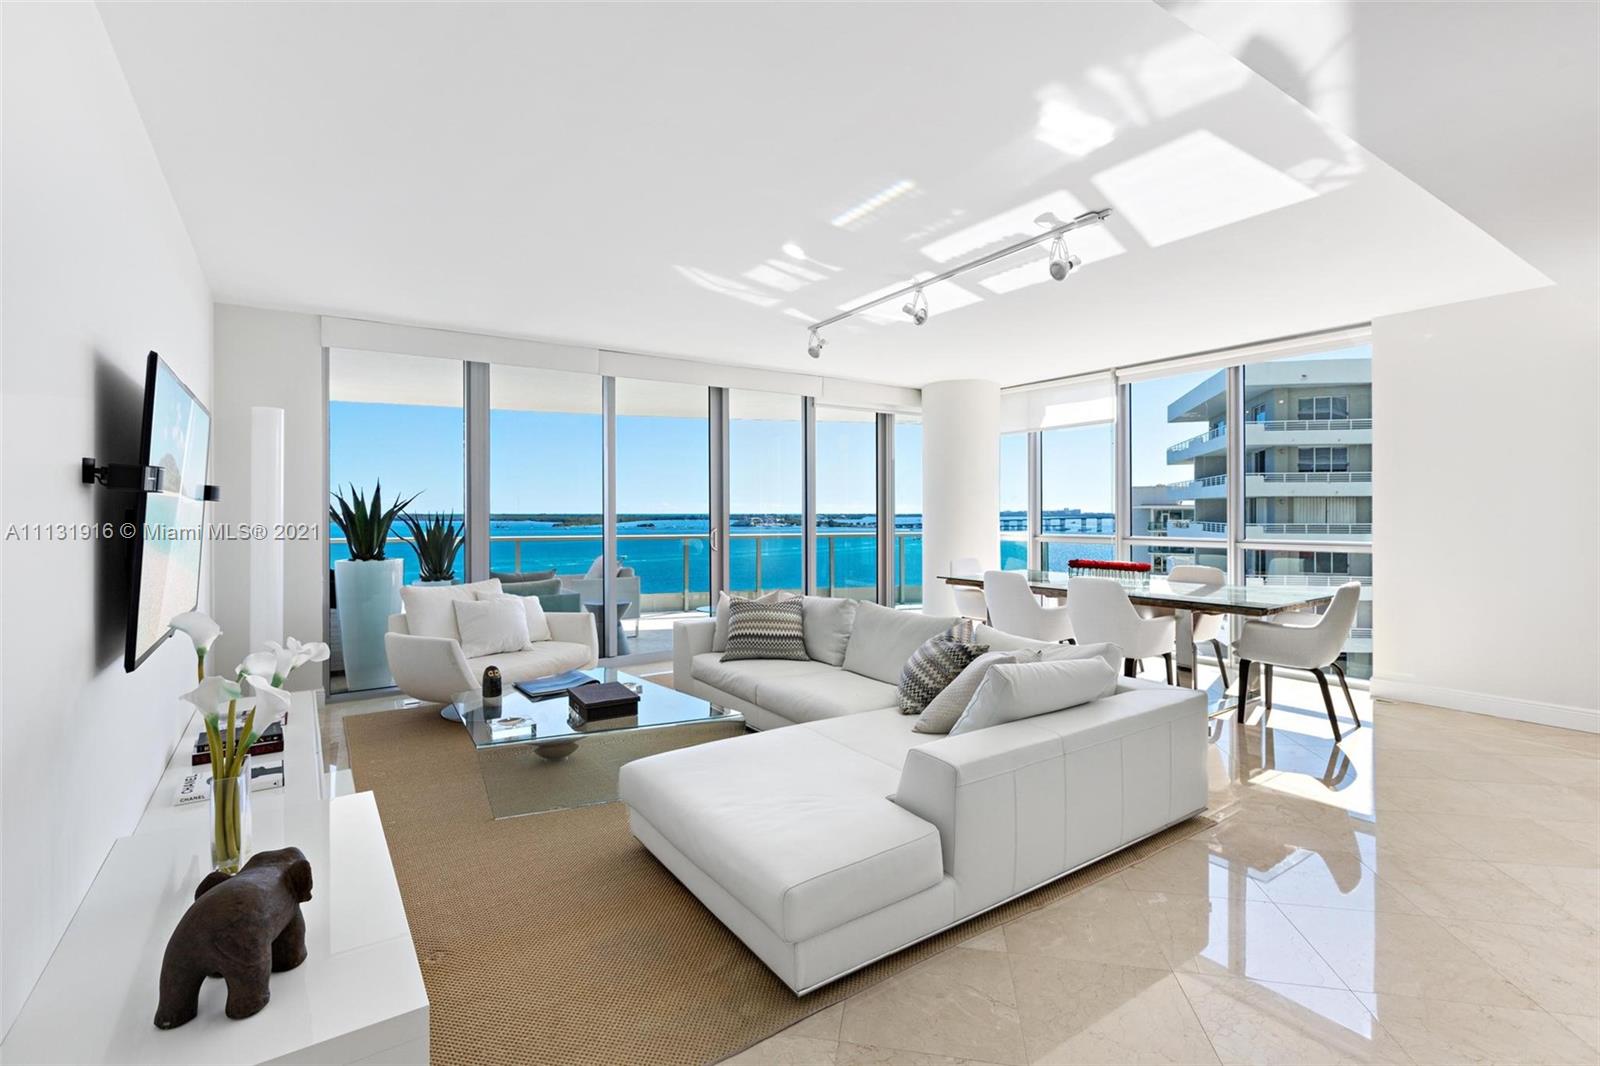 Amazing FULLY FURNISHED unit in one of the most desirable buildings in Brickell. Large 2 Bed + 2 Bath (1,878SF), with incredible views of the bay and Key Biscayne. Unit is in pristine condition, Italian Flooring, Italian Kitchen with top of the line appliances. Plenty of storage space, private elevator with foyer. Jade Brickell is a 5 star building with all amenities, including a state of the art gym and spa, pool. Walking distance to the best restaurants in town and also to Brickell City Center. MUST SEE !